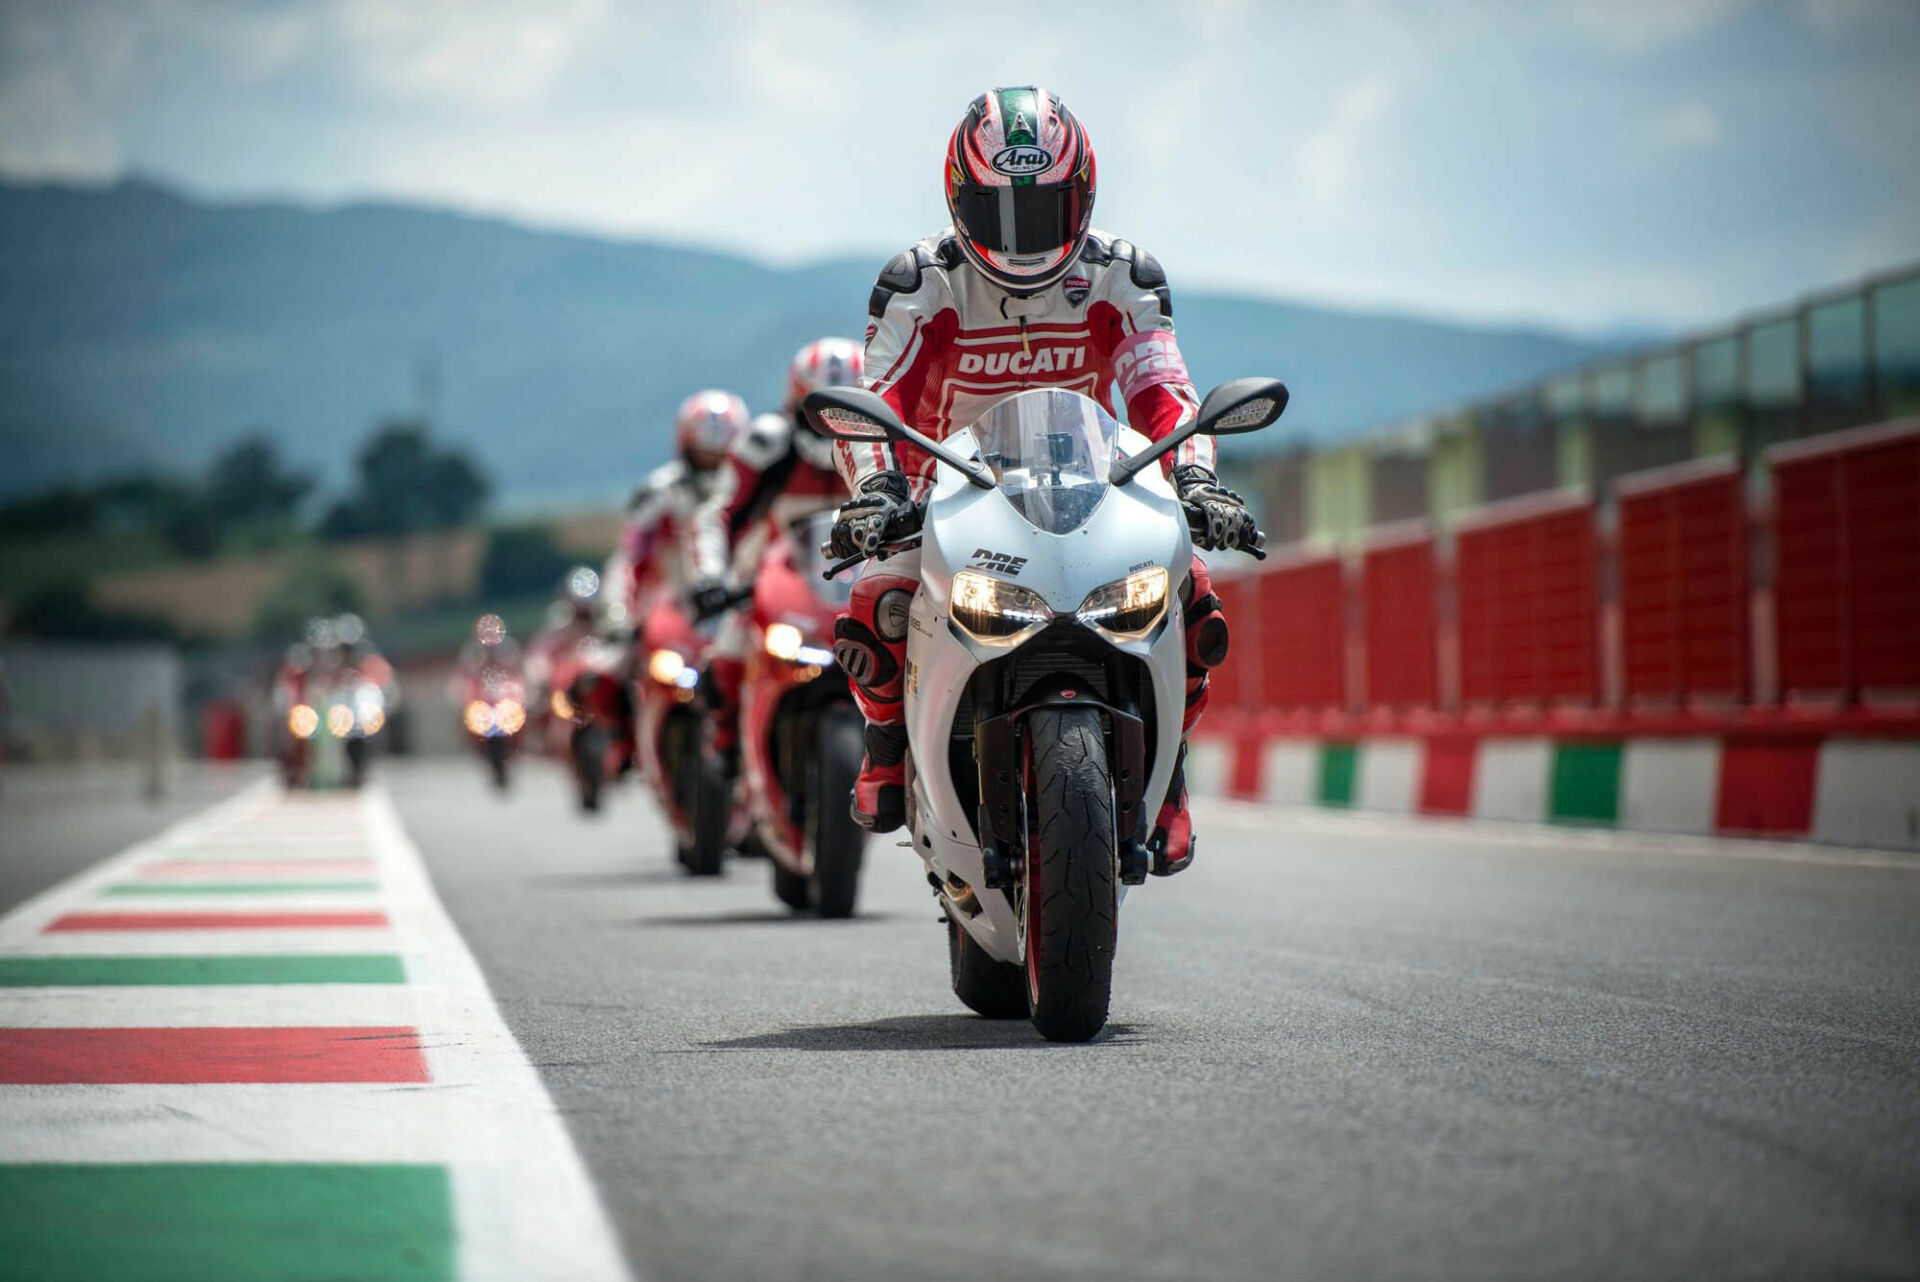 The Ducati Riding Experience (DRE) is coming to Circuit of The Americas (COTA) September 10-11, 2023. Photo courtesy Ducati.